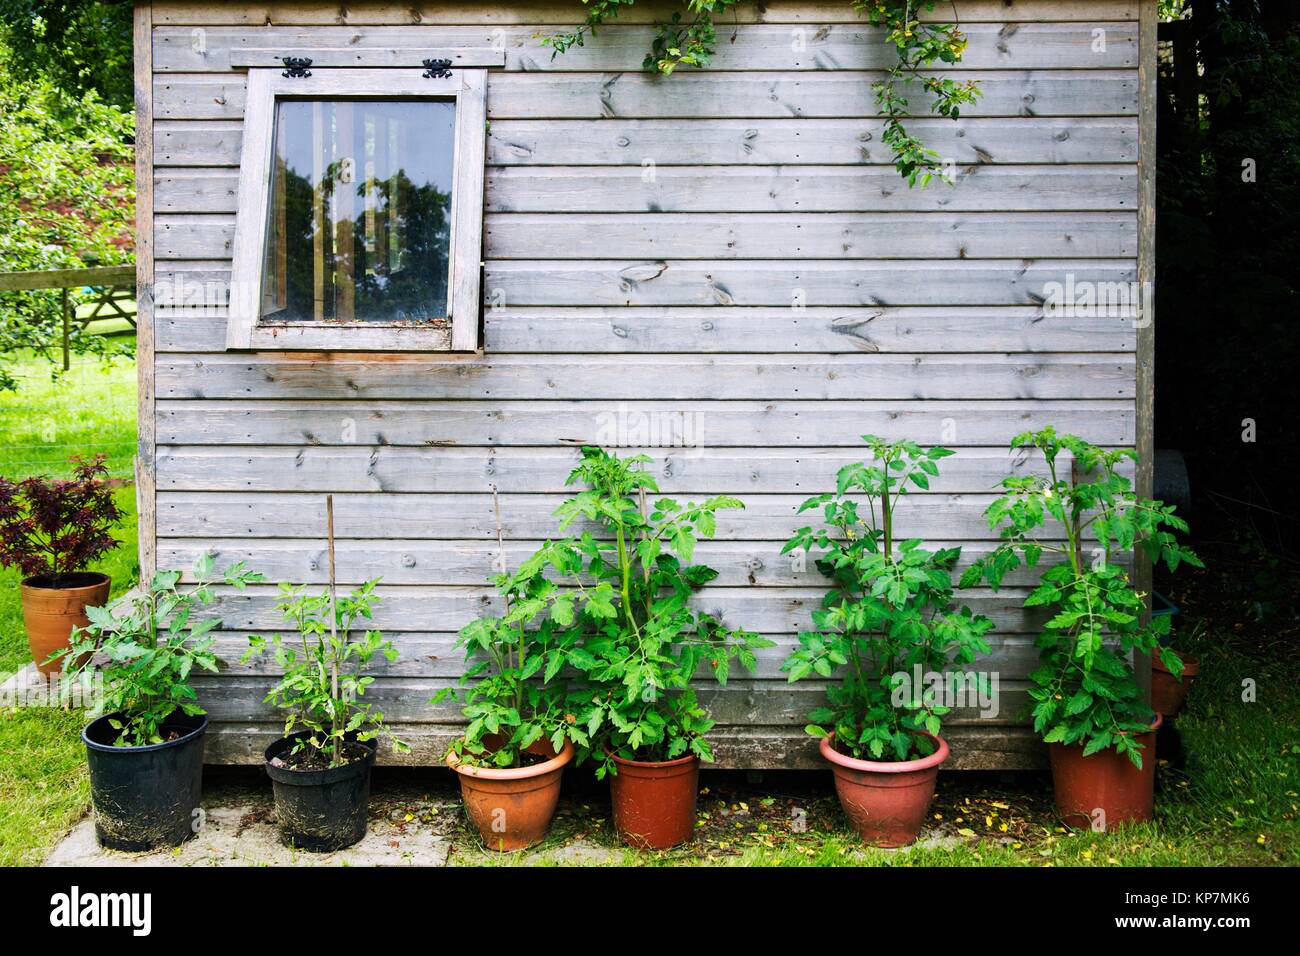 Tomato plants growing outdoors against a wooden garden shed Stock Photo